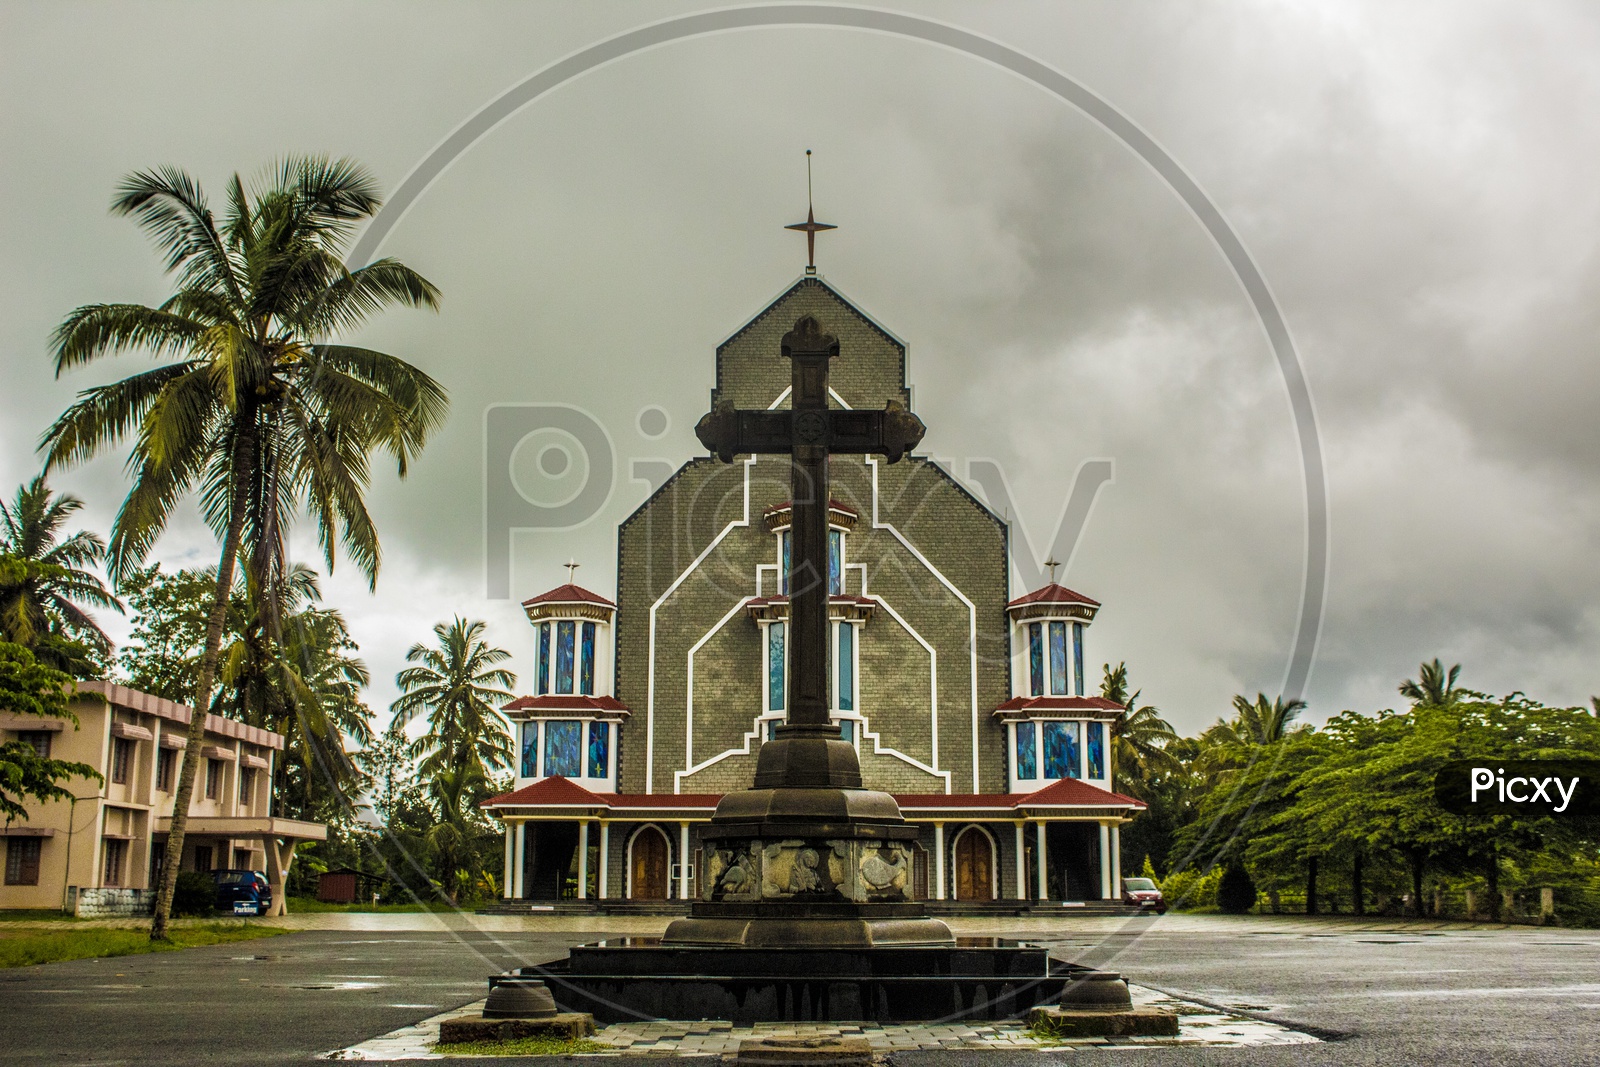 This is one of the famous church in Wayanad, Kerala